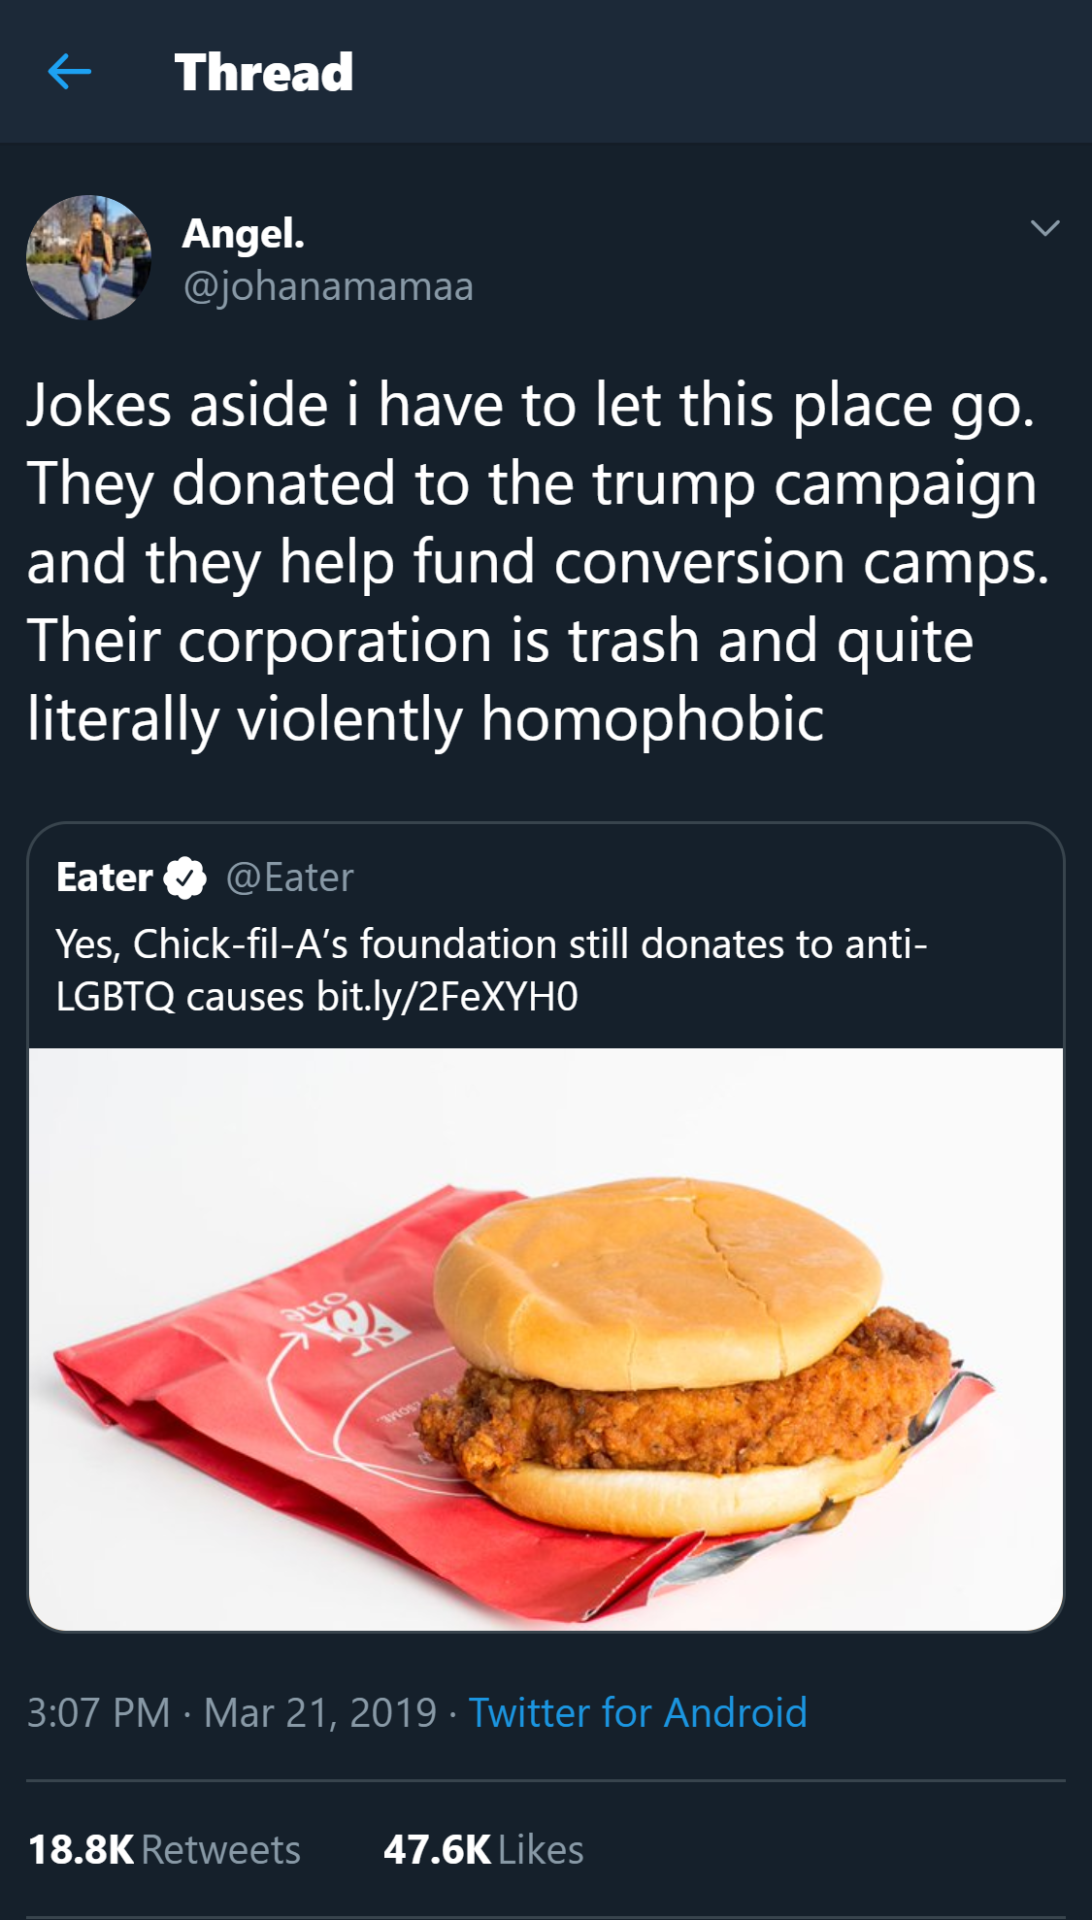 Yes, Chick-fil-A’s Foundation Still Donates to Anti-LGBTQ Causes